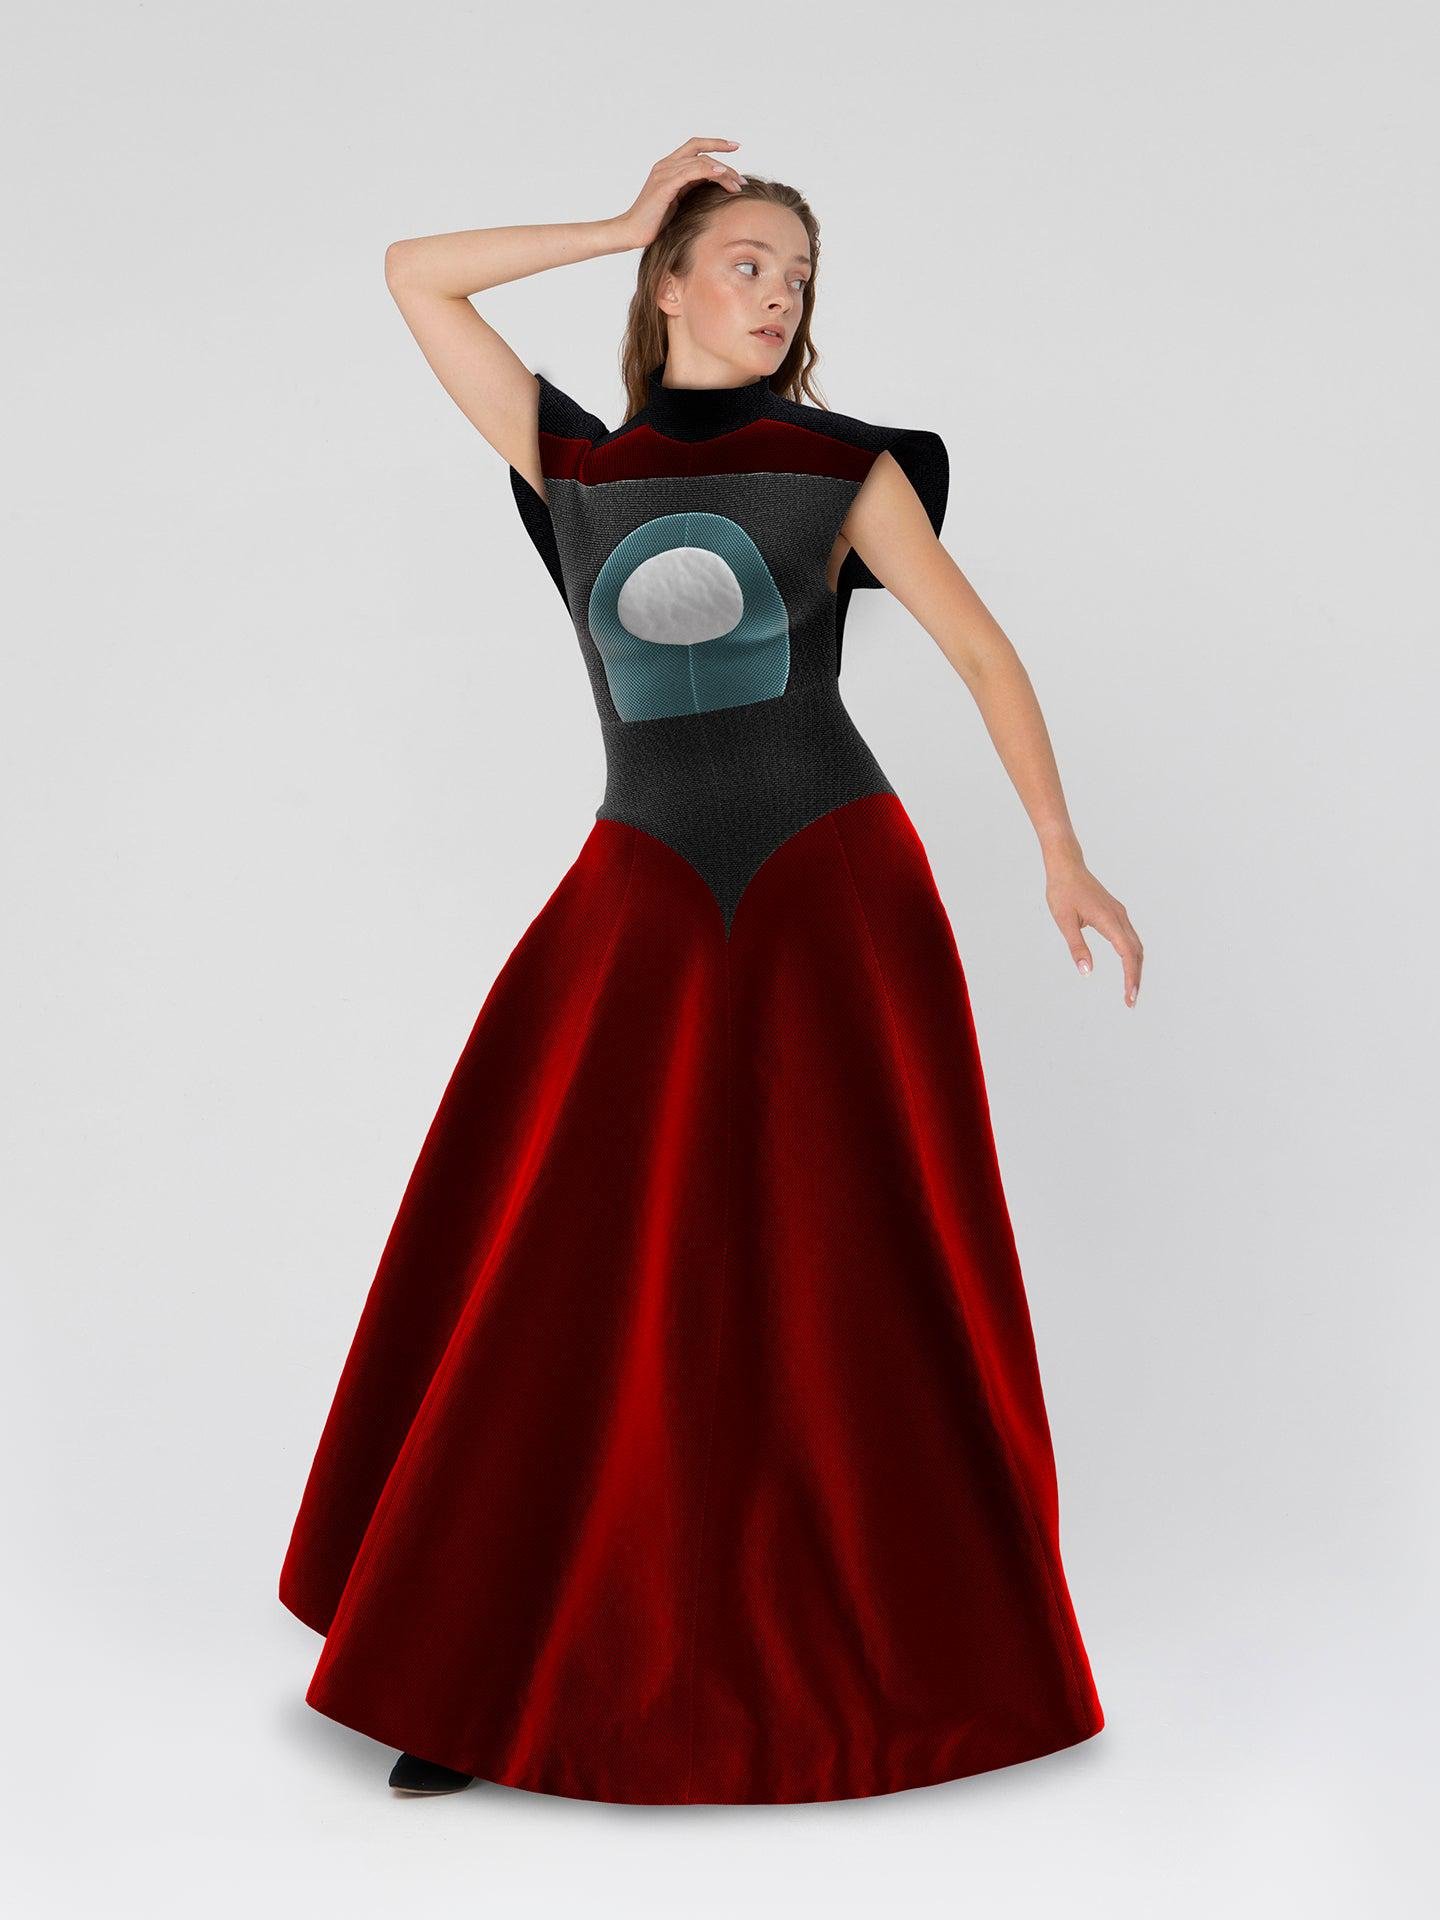 Queen of the universe gown by DRESSX DRAG METAVERSE